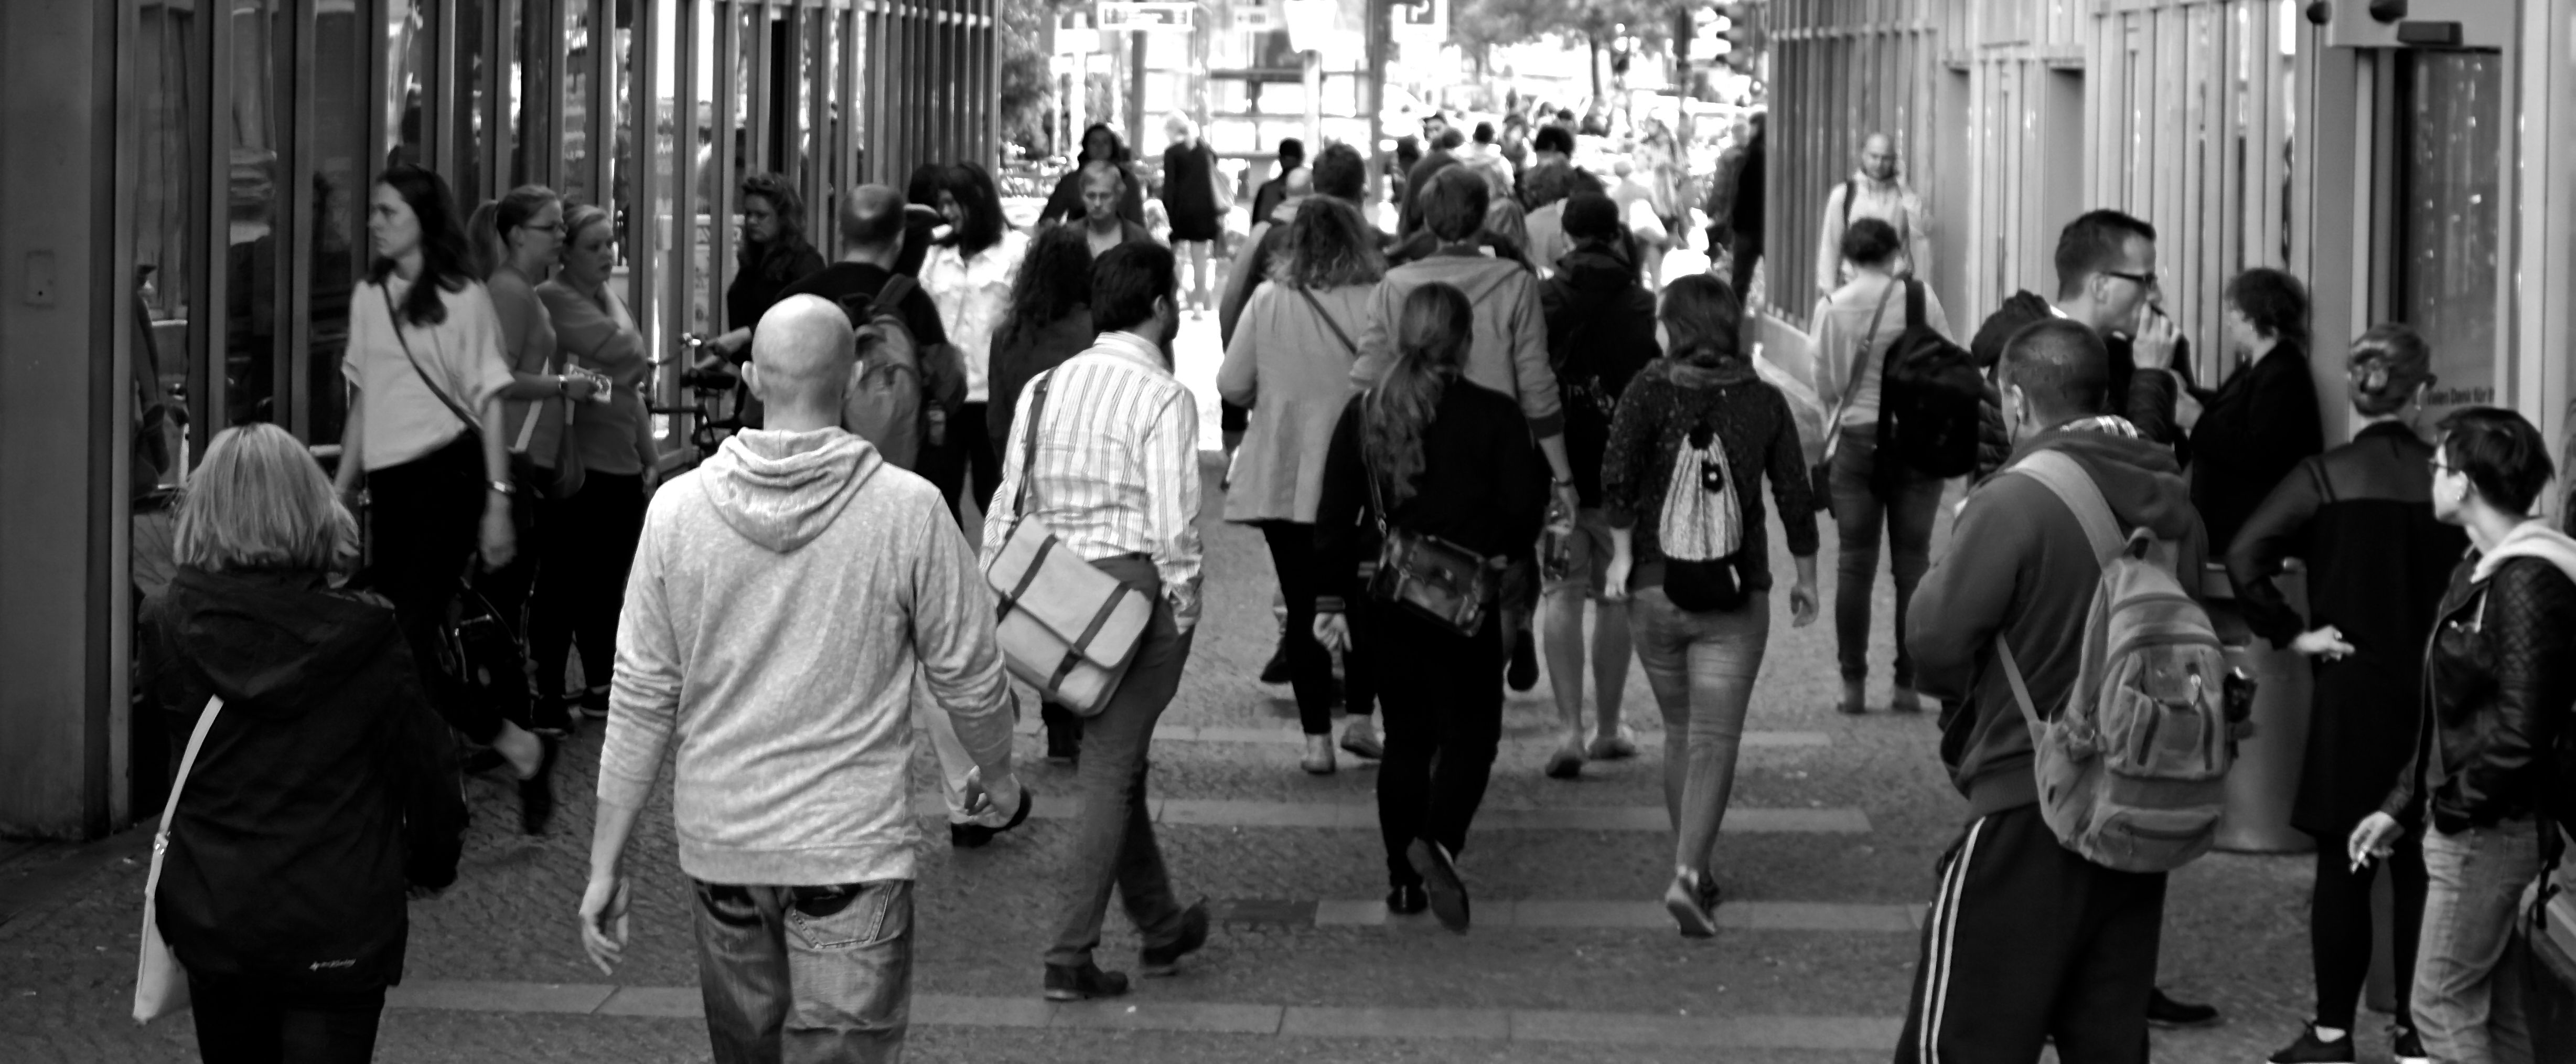 Grayscale Photography of People Walking Near Buildings · Free